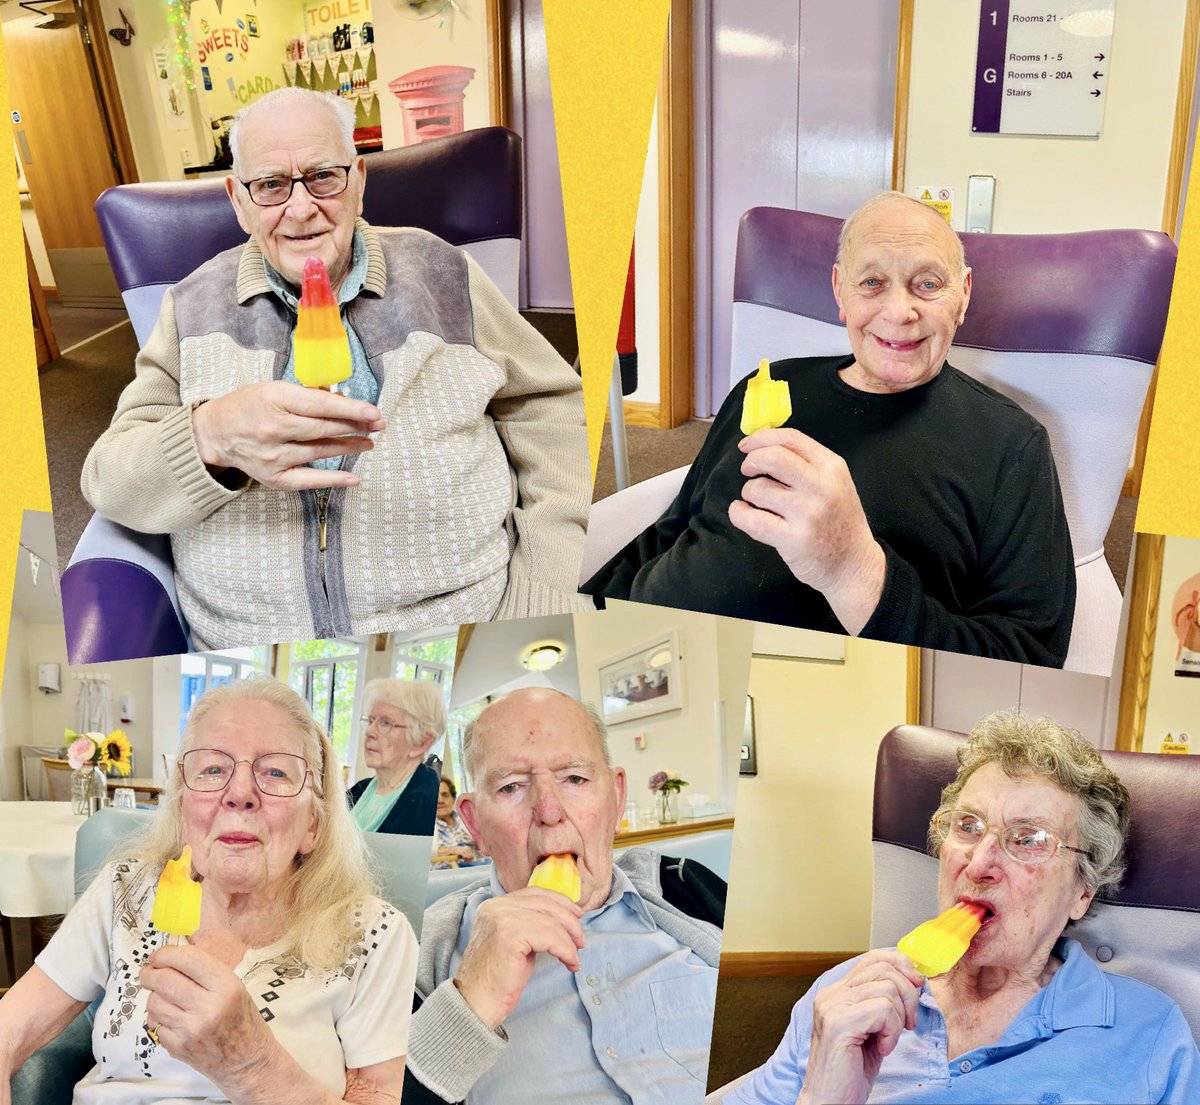 Enjoying the sun and some ice lollies of course to keep cool 🌞🍨🍦😄🥰#thursdayvibes #chilling #garden #sunshine #keepingcool #hydrate @Dawson_Lodge @AnchorLaterLife @AnchorJobs